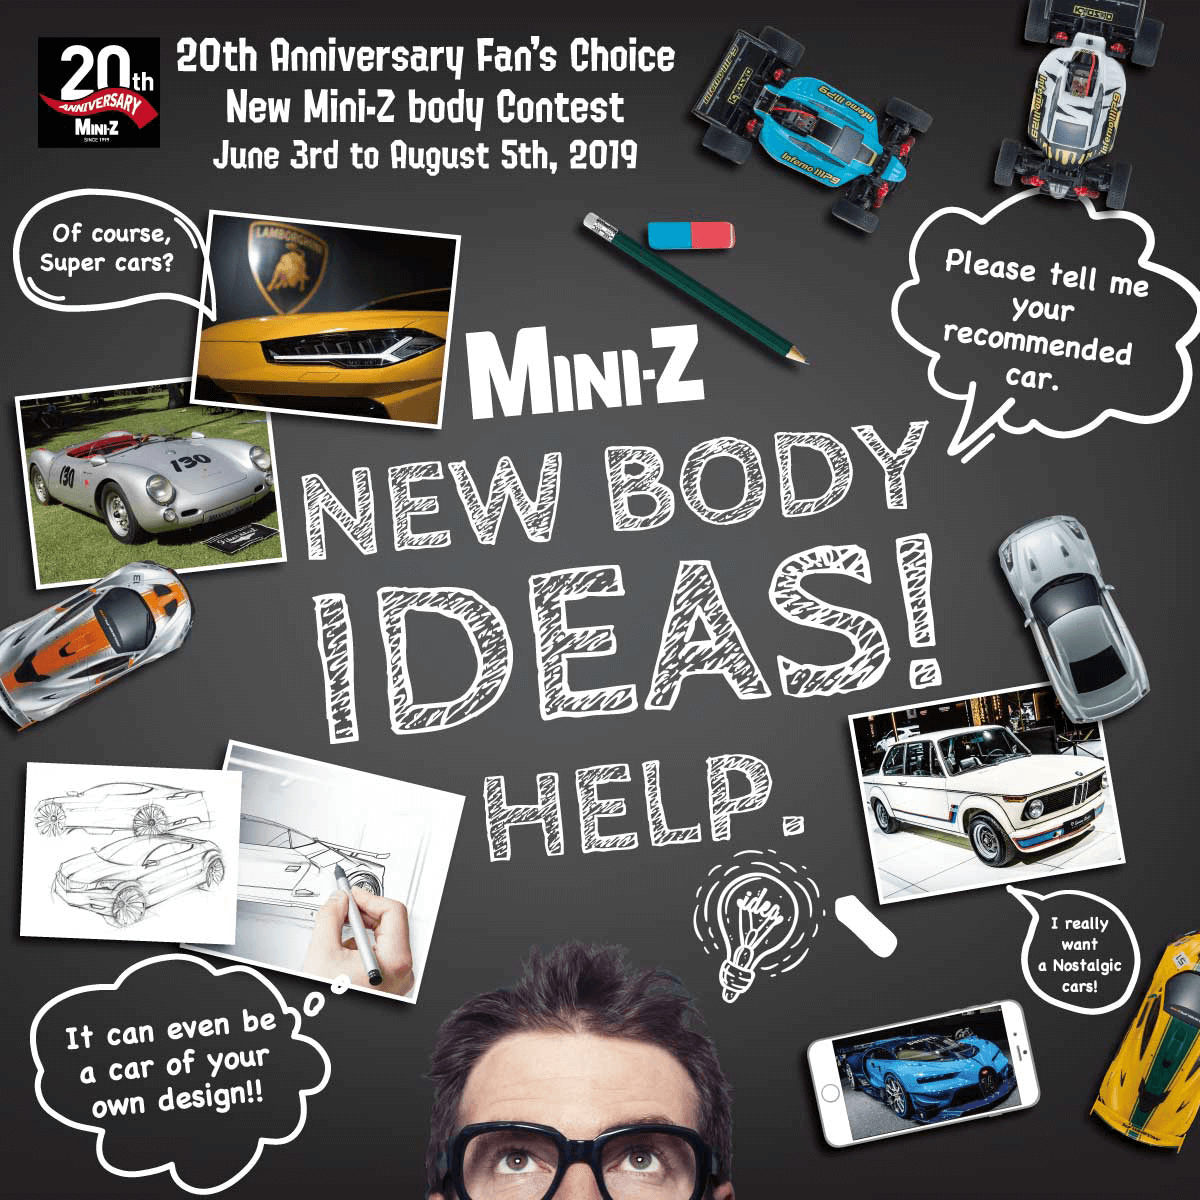 Please tell me your recommended car. Fan's Choice New Mini-Z body Contest. June 3rd to August 5th, 2019